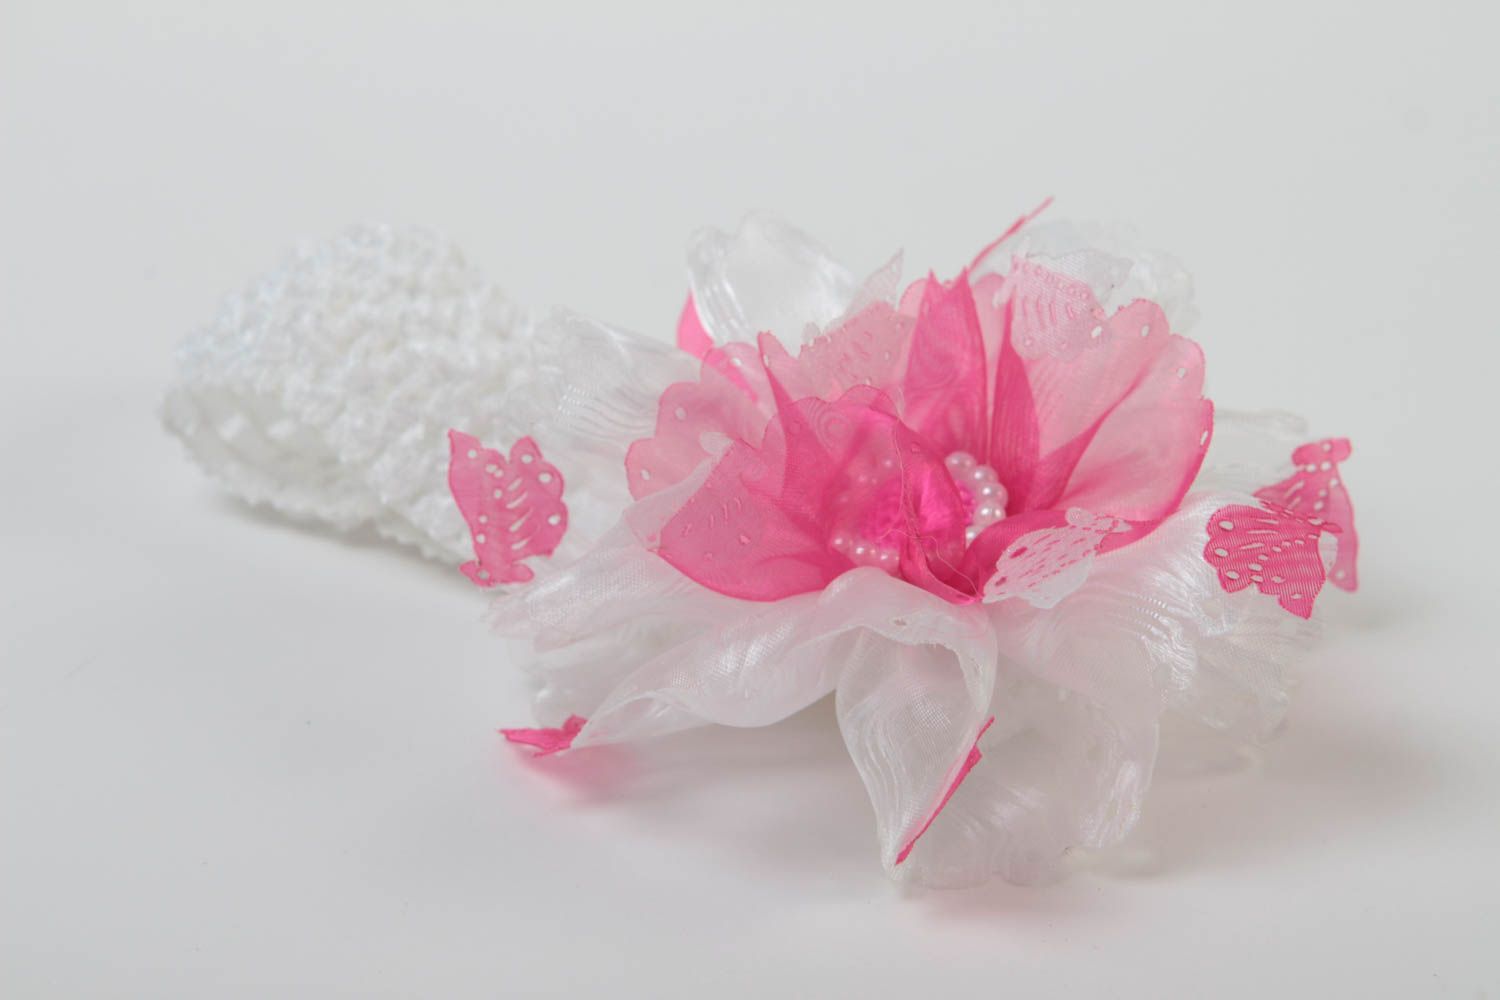 Gentle handmade textile flower headband flowers in hair gifts for her photo 3